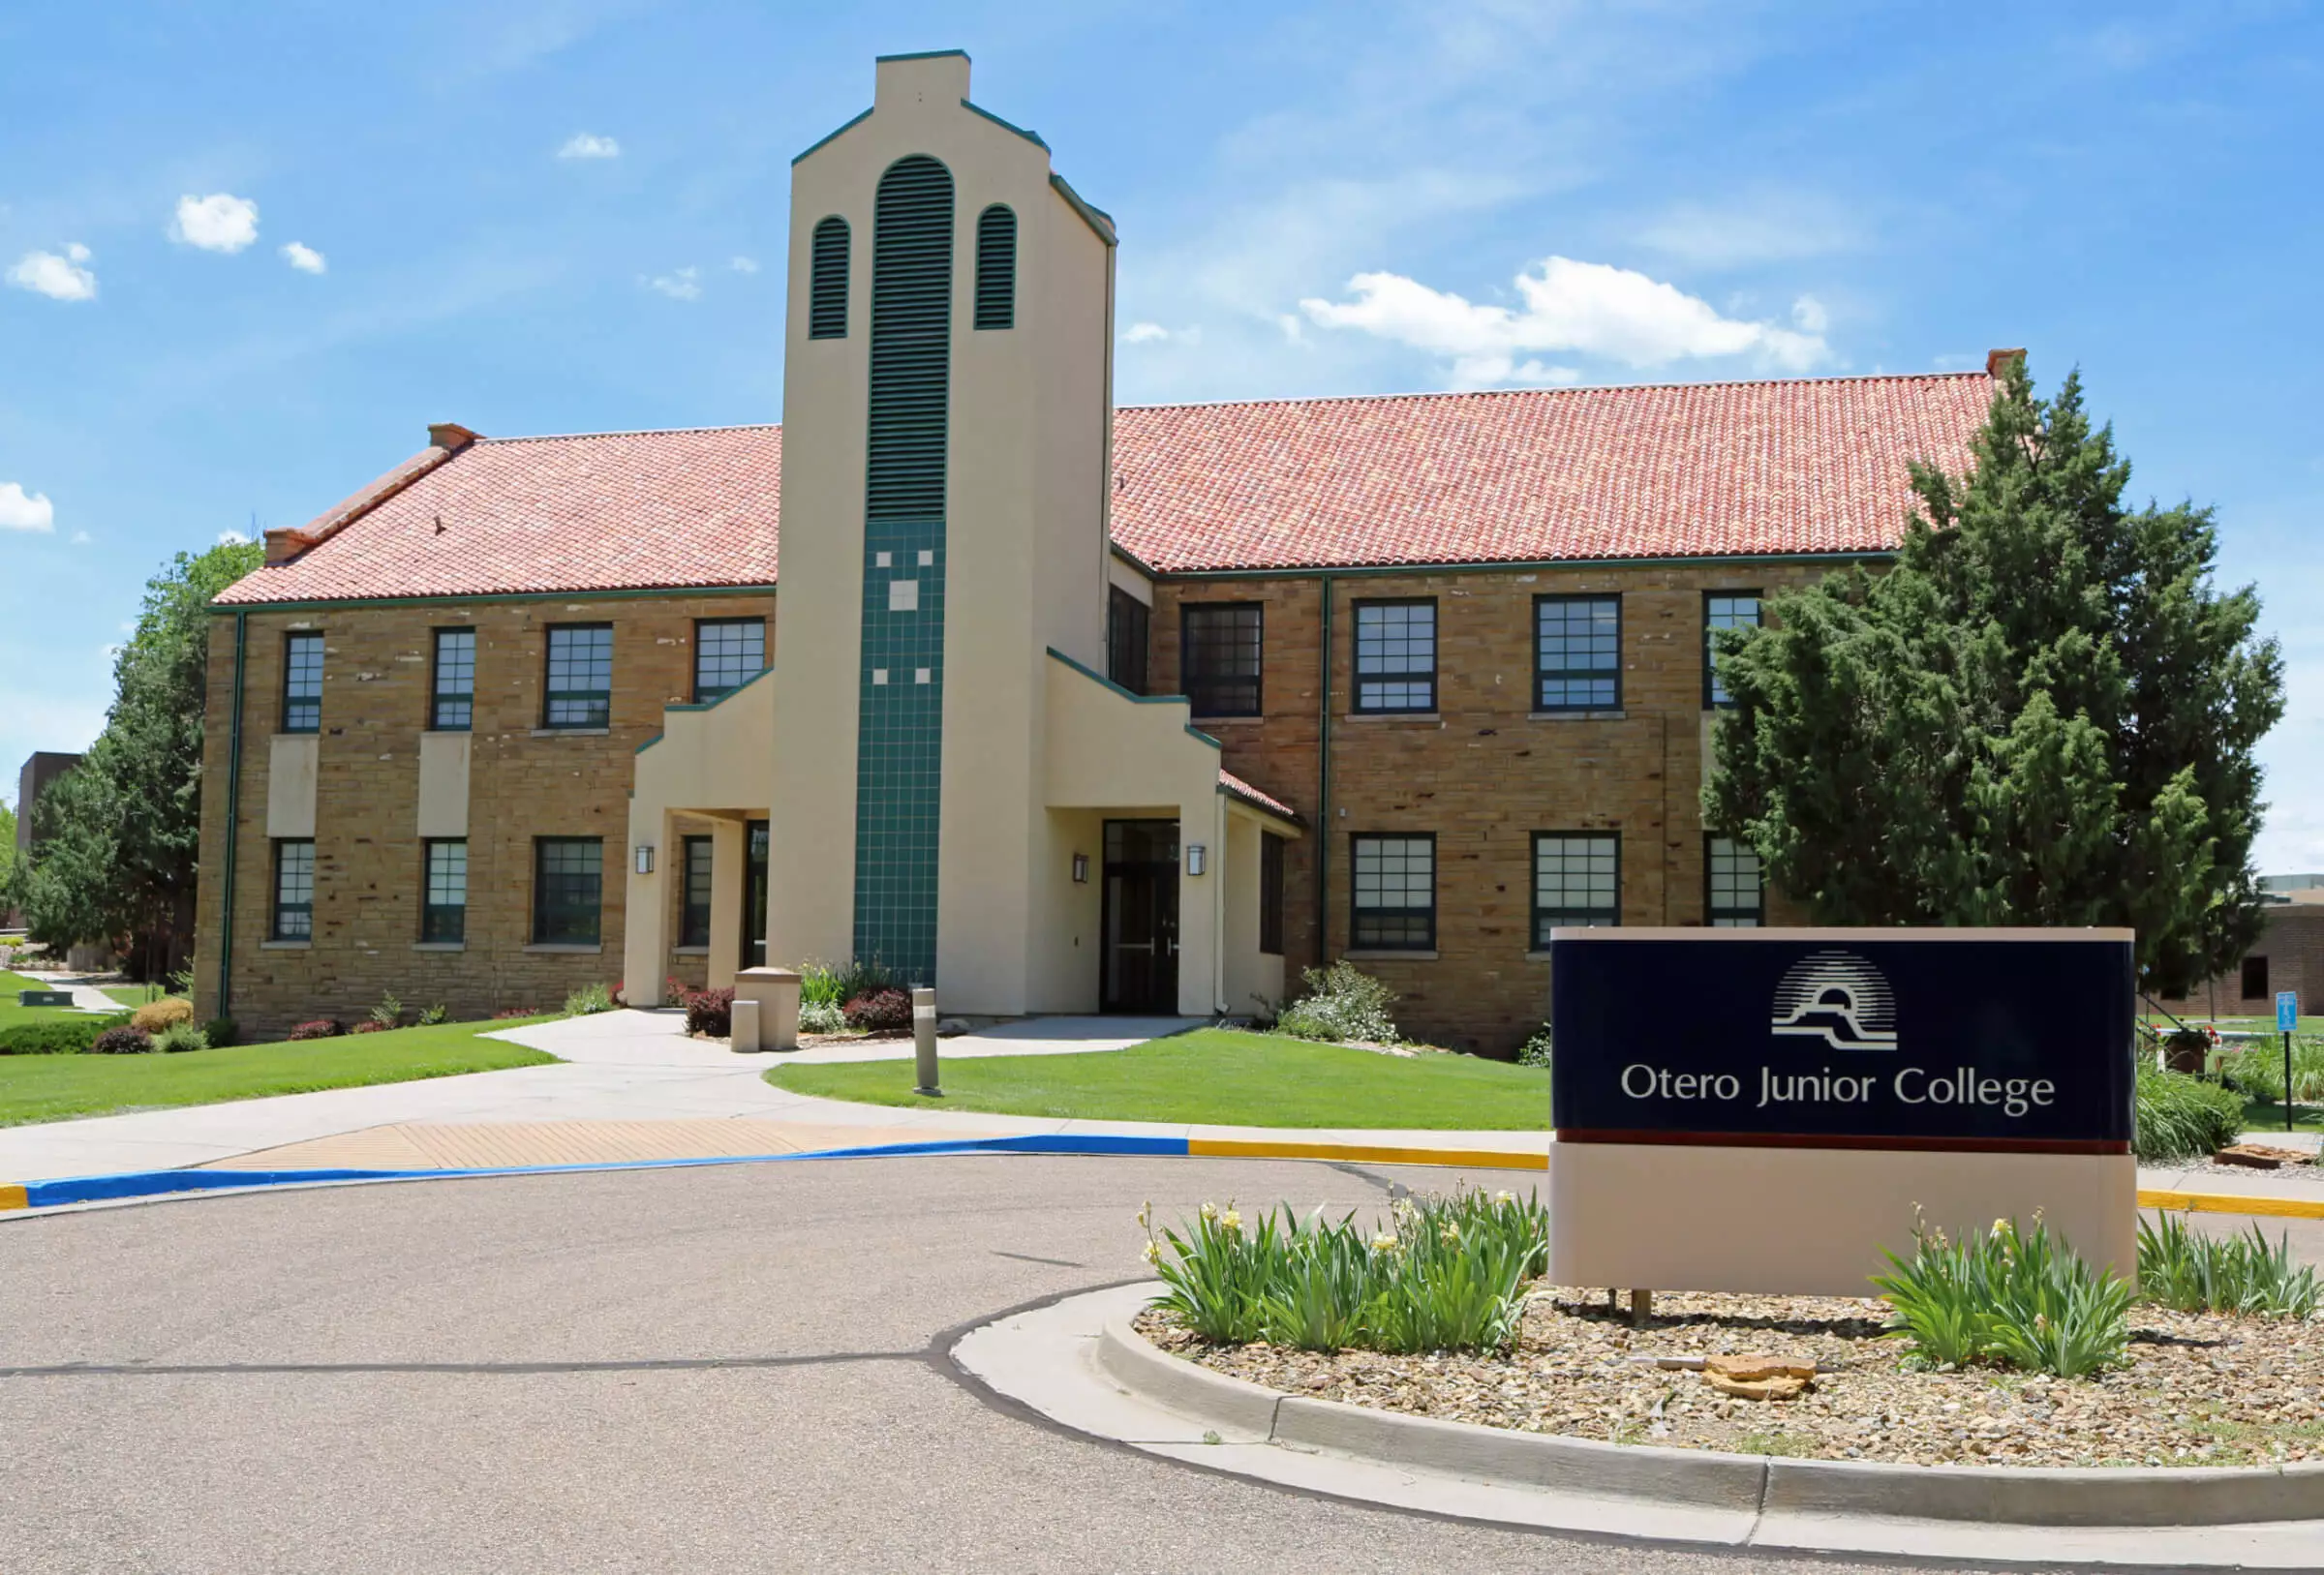 Otero College Joins Growing Rank of Colorado Community College System Institutions to Deploy YuJa Enterprise Video Platform Sitewide